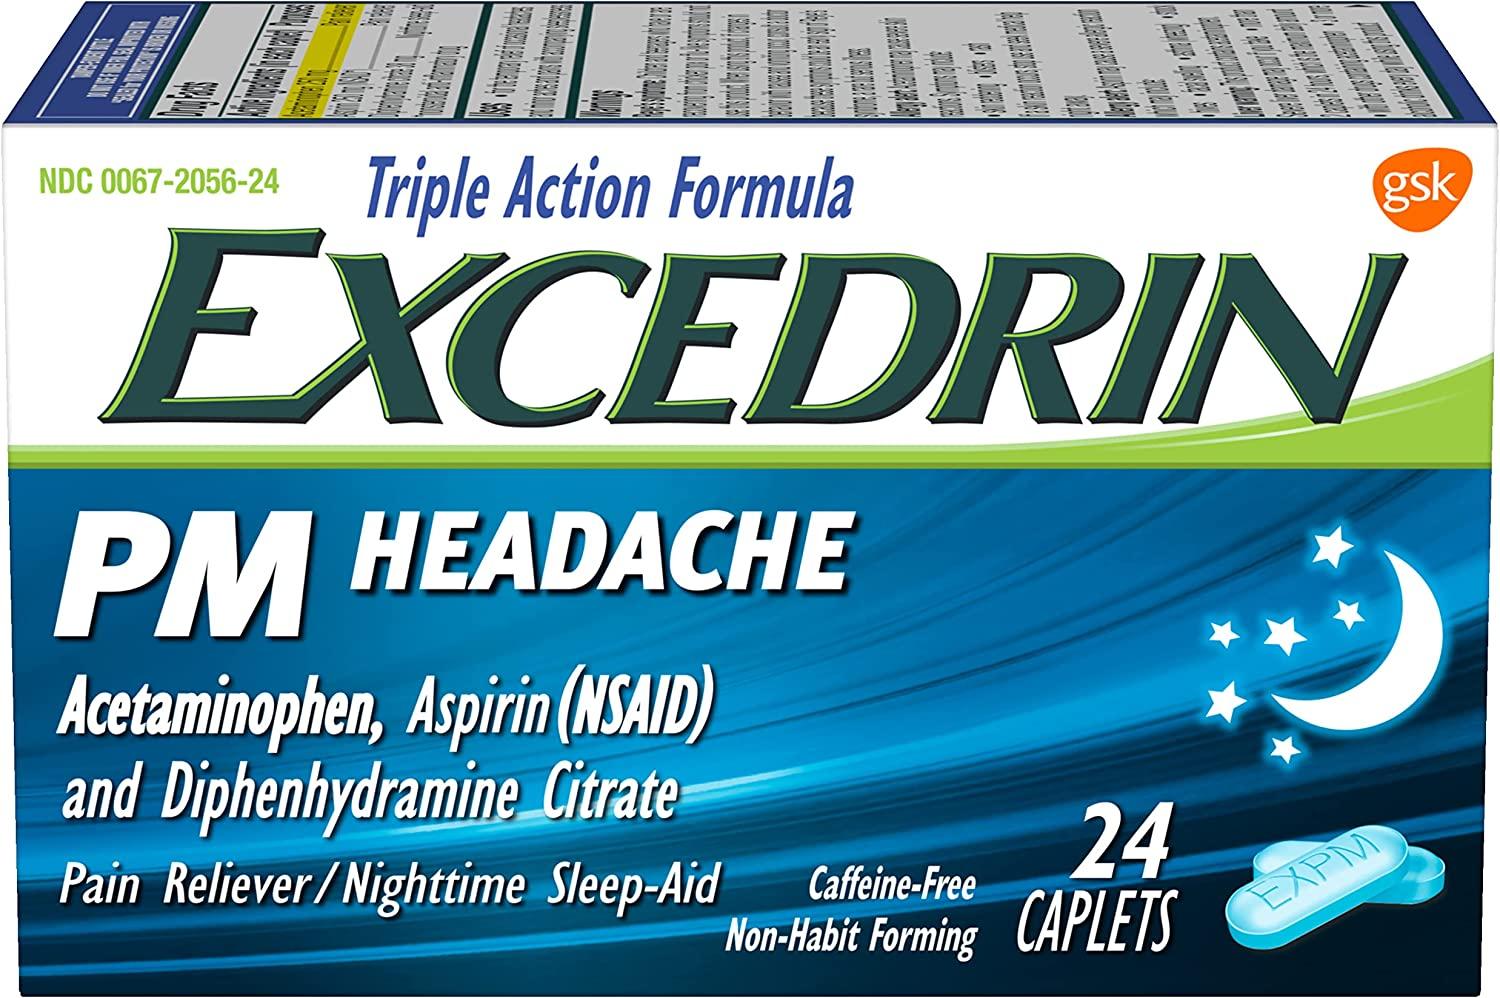 Excedrin PM Headache Sleep Relief Caplets 24 Count for $2.35 Shipped